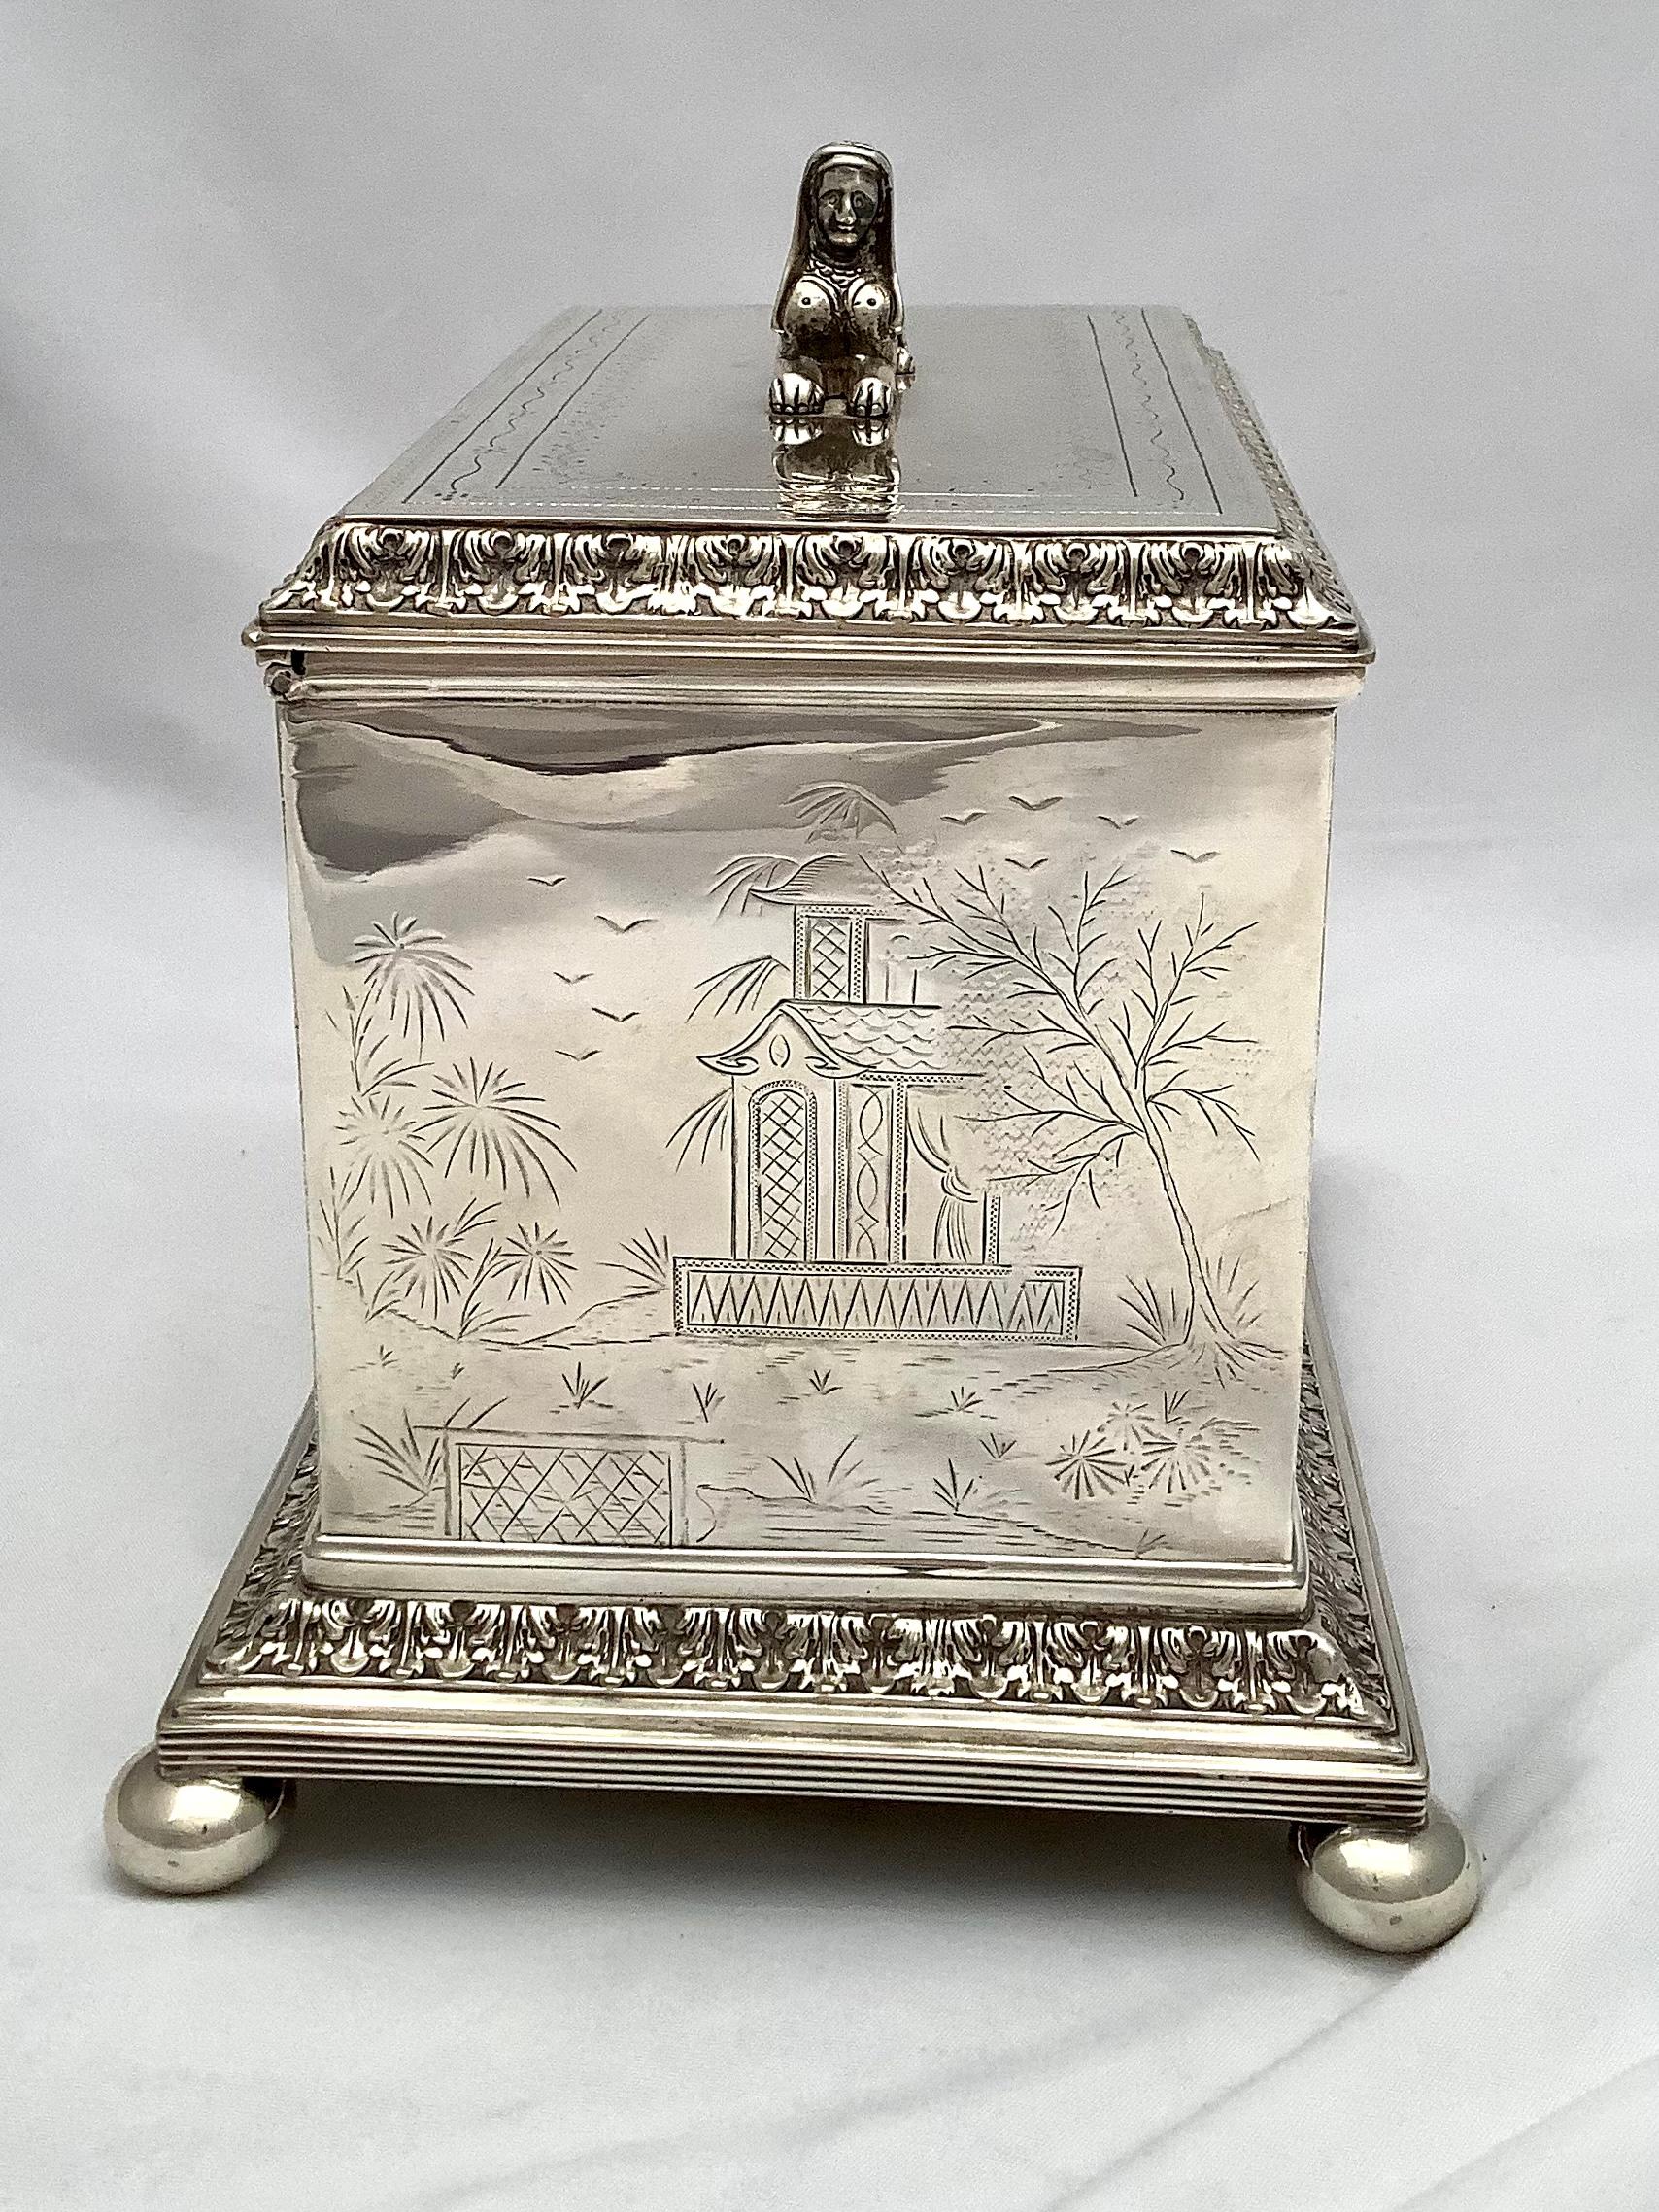 Engraved Silver Box with Asian Decorative Engraving